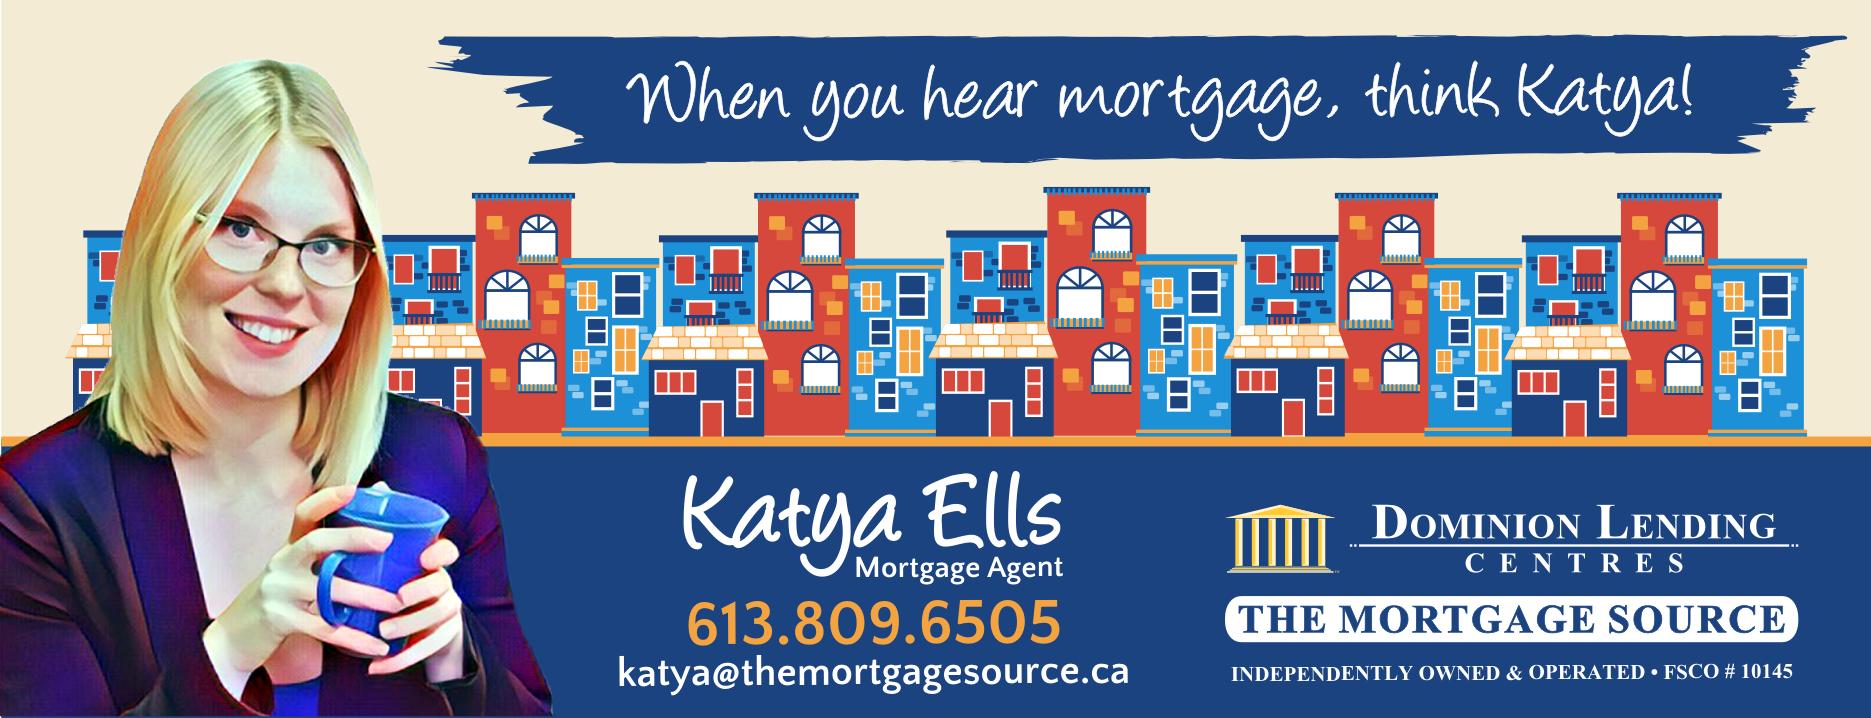 Katya Ells Dominion Lending Centres The Mortgage Source - Almonte 110 Heather Crescent, Almonte Ontario K0A 1A0